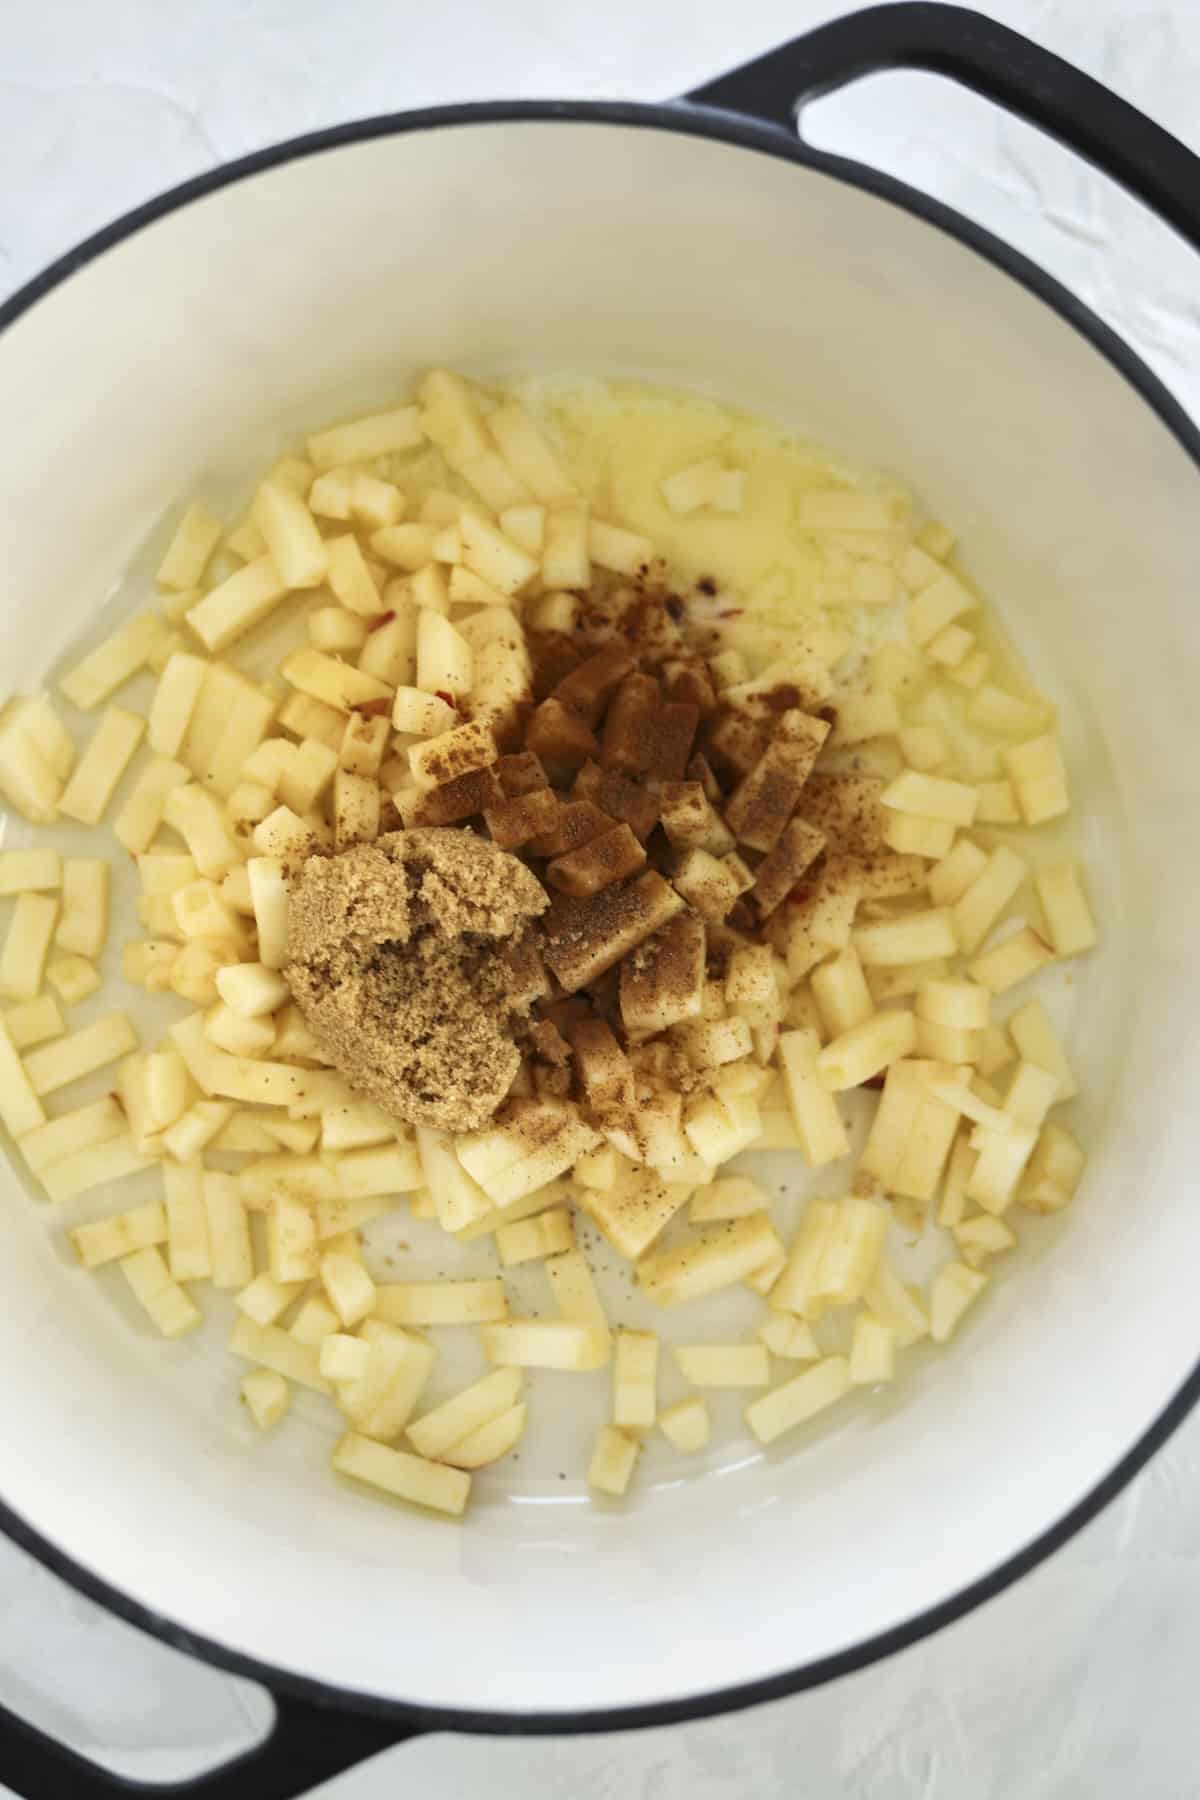 chopped apples in a pot topped with brown sugar and cinnamon